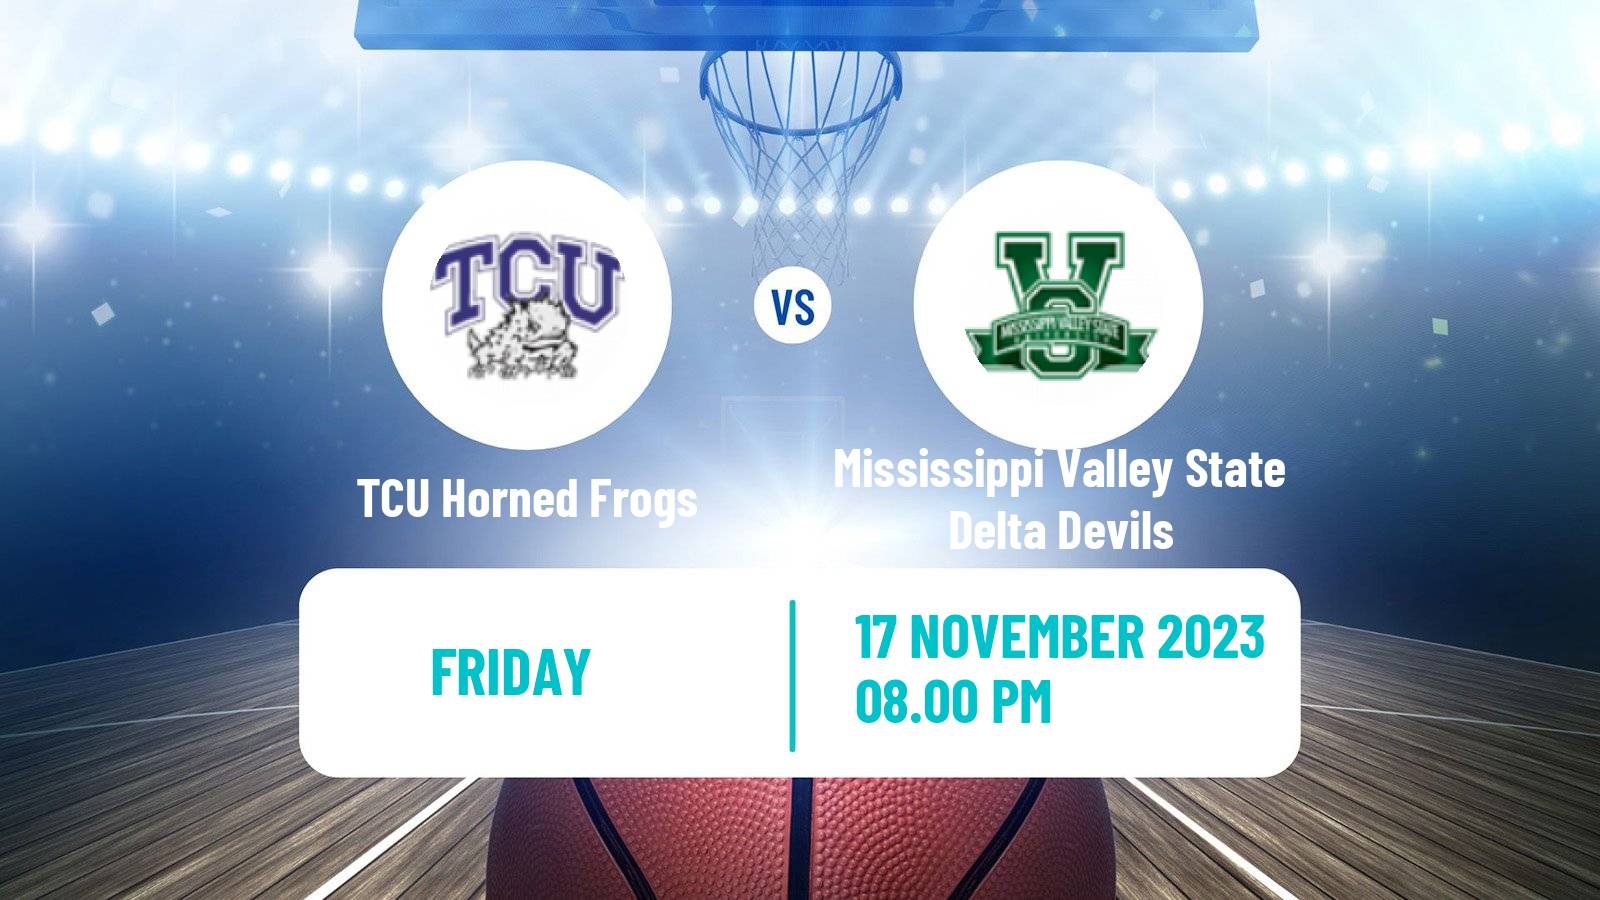 Basketball NCAA College Basketball TCU Horned Frogs - Mississippi Valley State Delta Devils